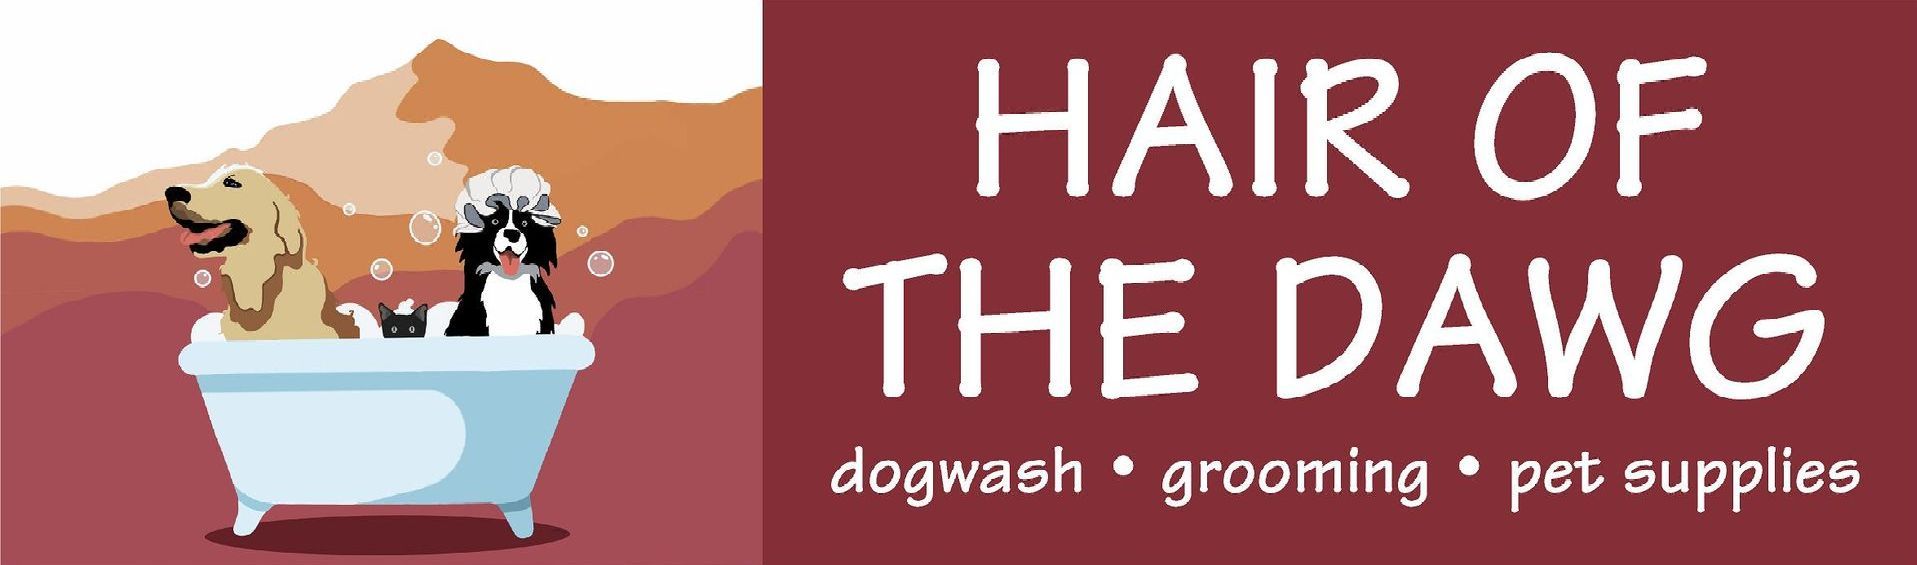 the logo for hair of the dawg shows two dogs in a bathtub .